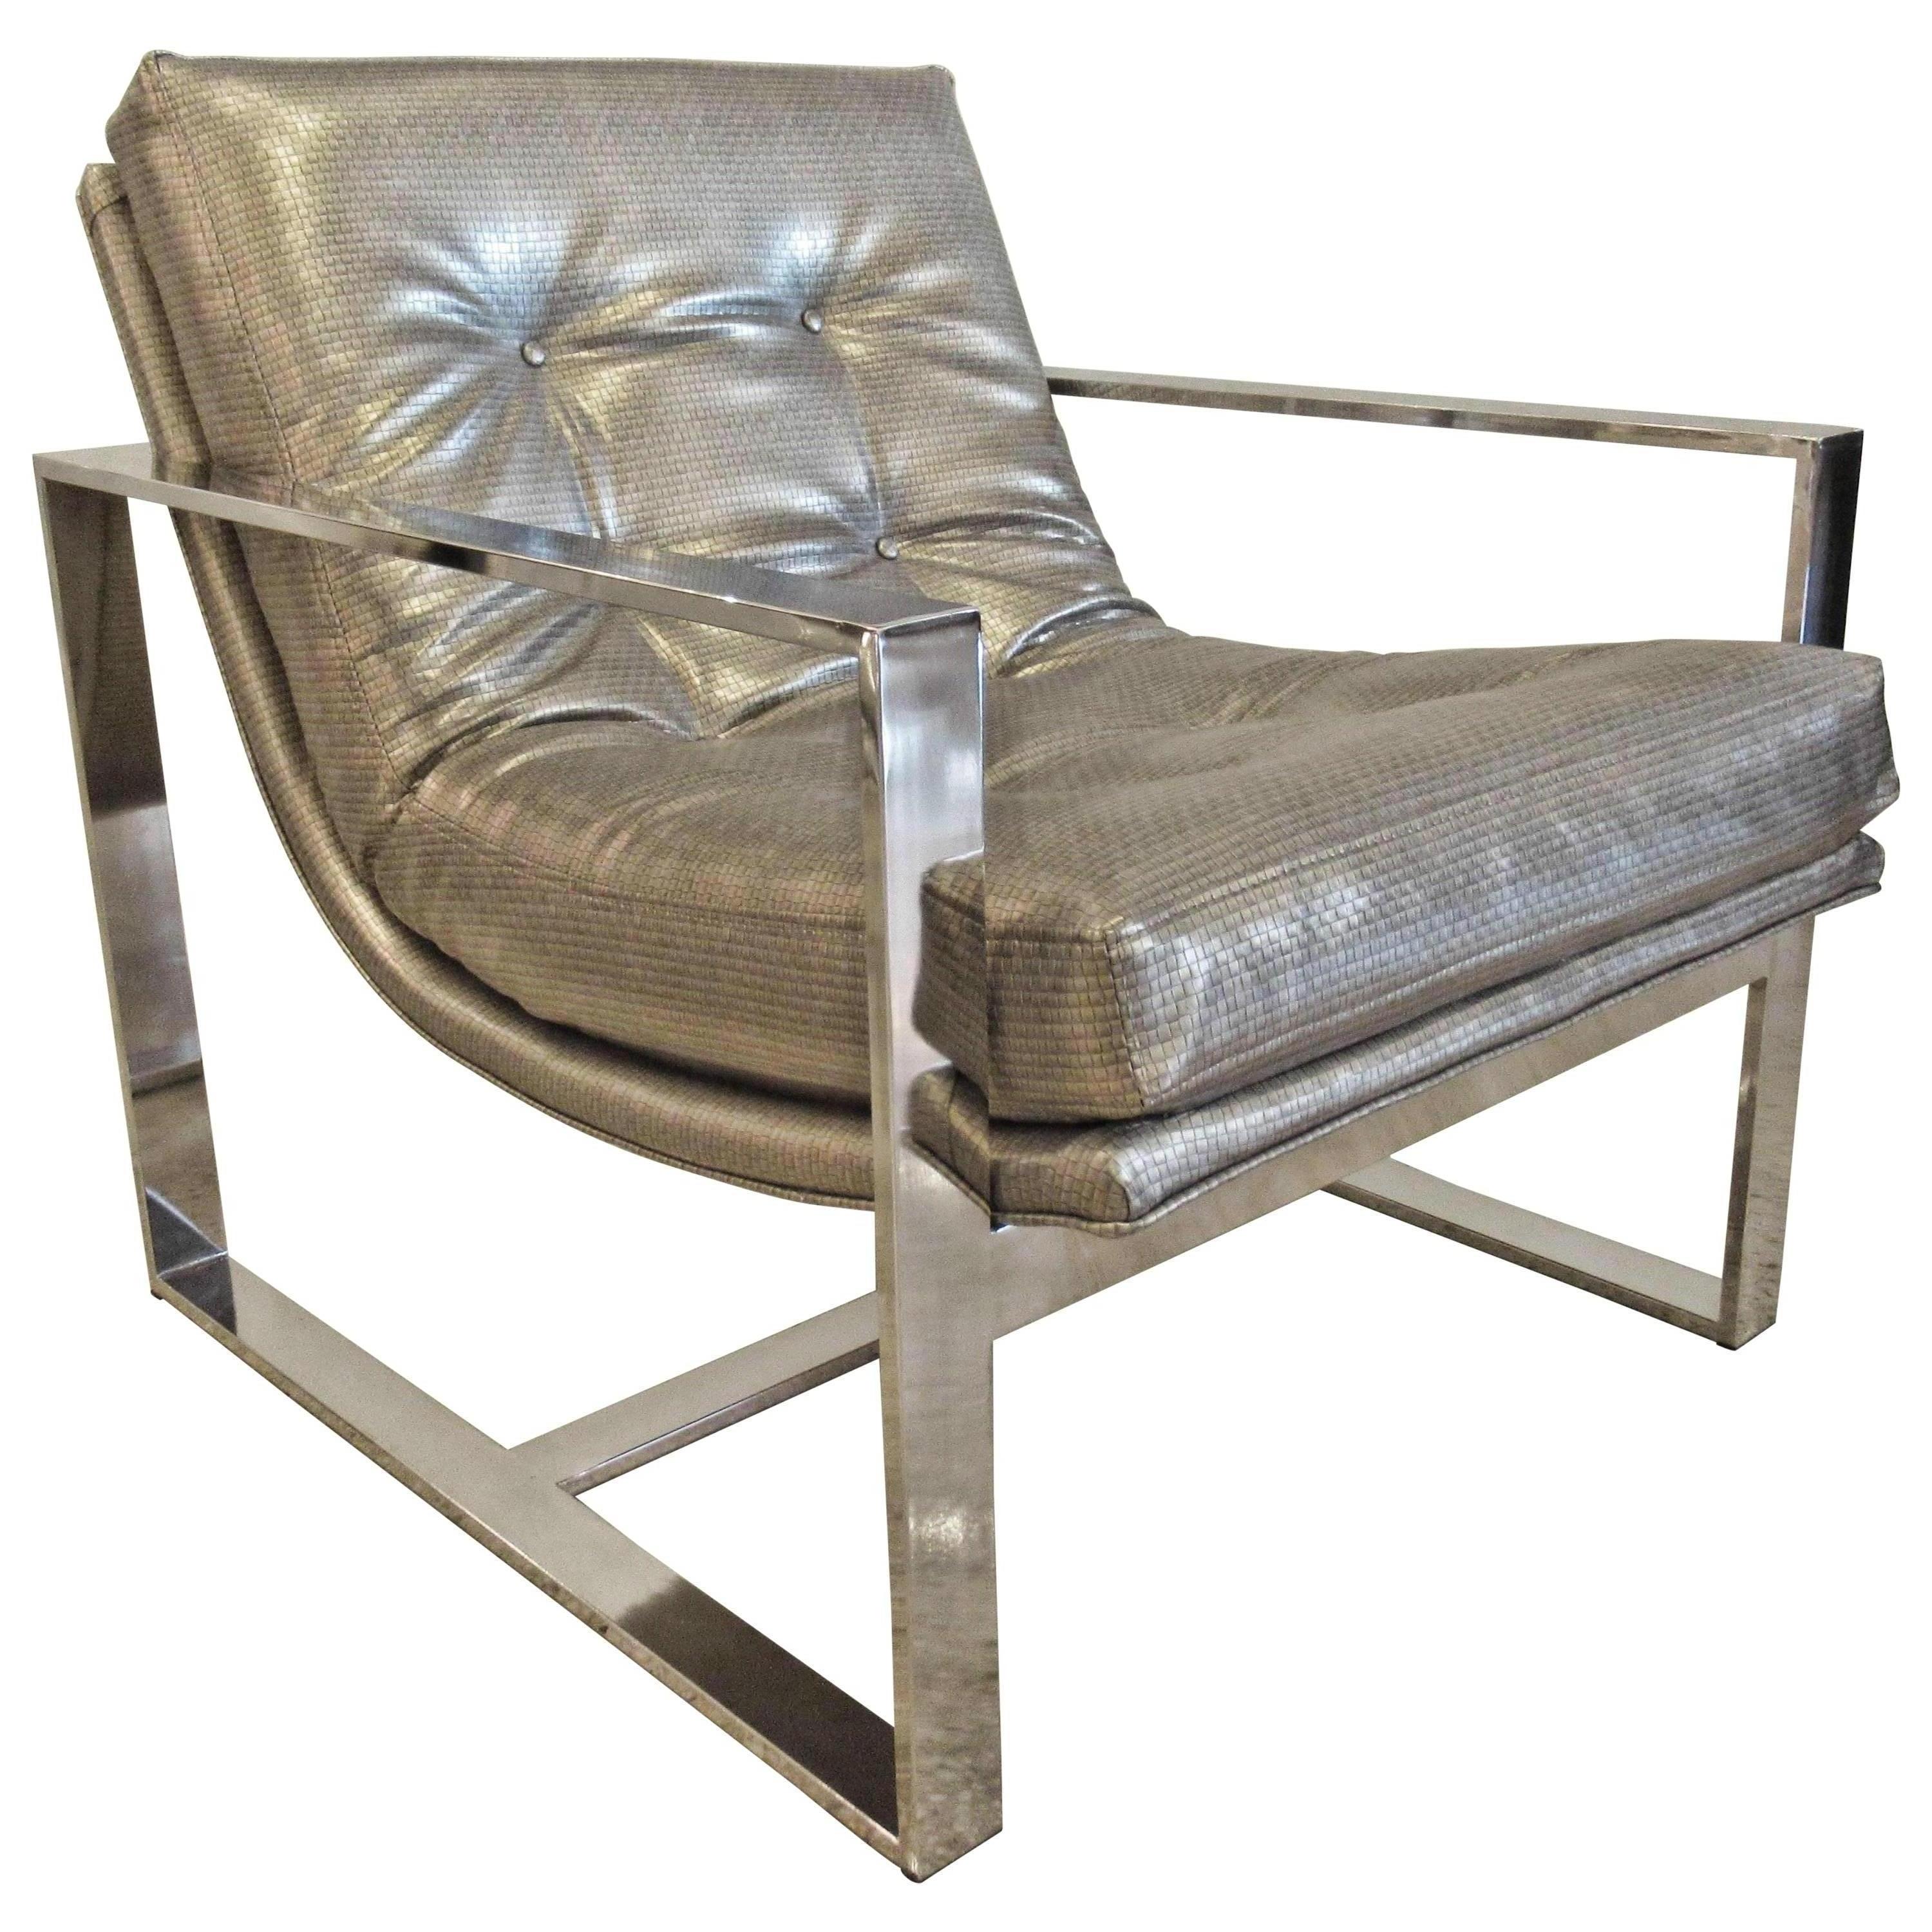 American Modern Polished Chrome Sling Chair, 1970s For Sale